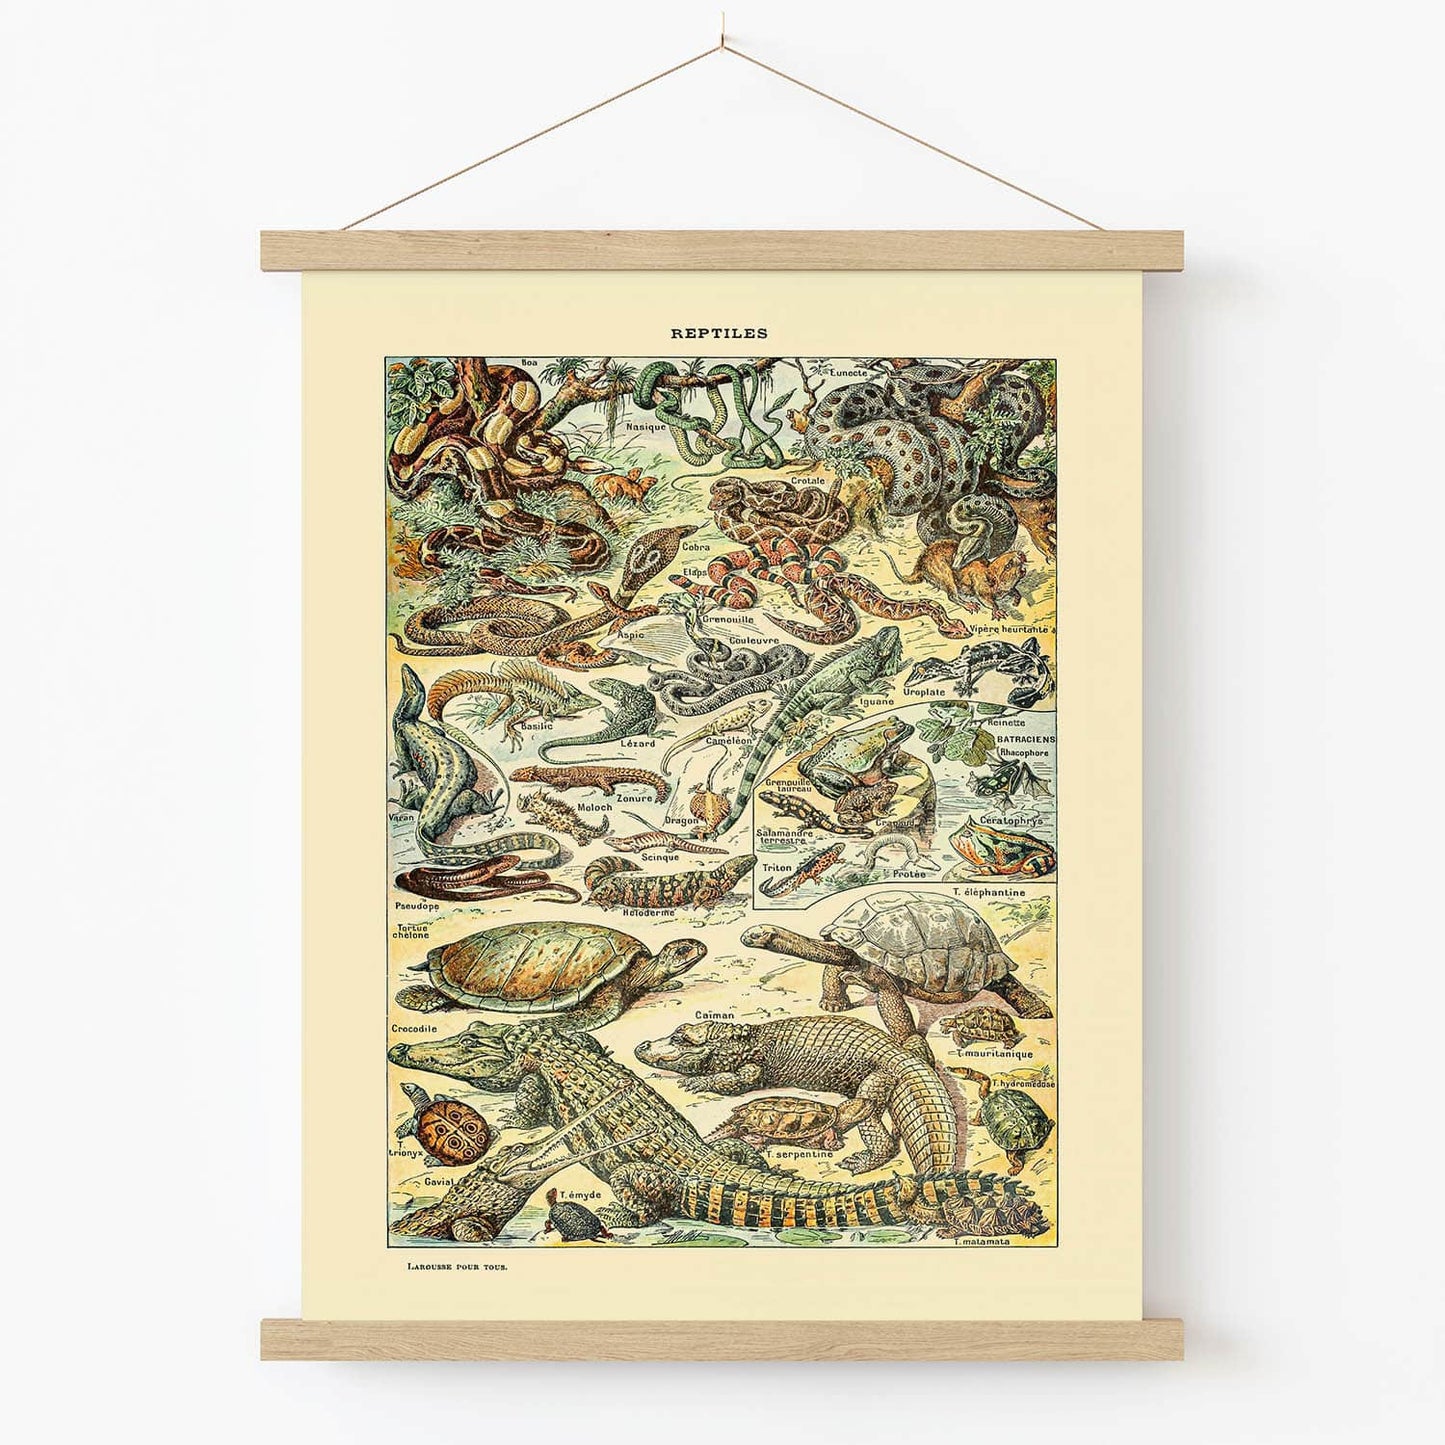 Wild Reptiles Art Print in Wood Hanger Frame on Wall